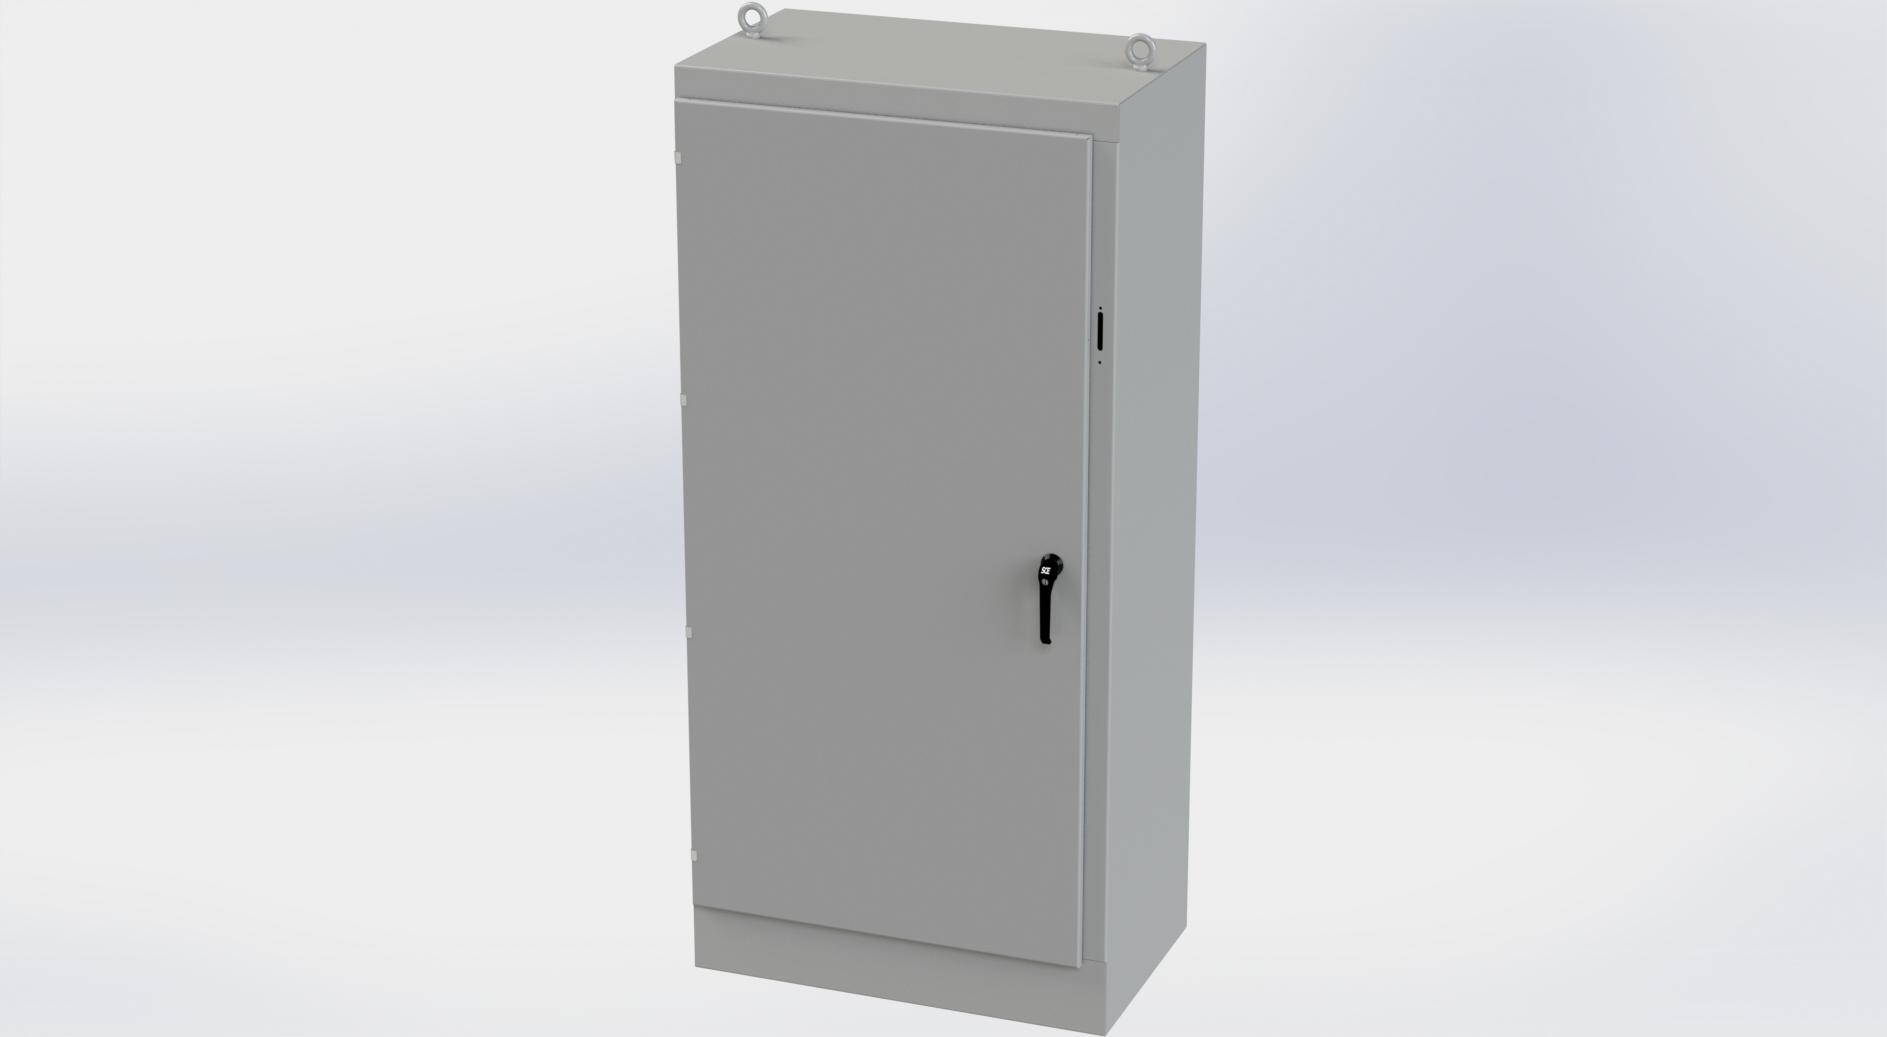 Saginaw Control SCE-84XM4024G 1DR XM Enclosure, Height:84.00", Width:39.50", Depth:24.00", ANSI-61 gray powder coating inside and out. Sub-panels are powder coated white.  